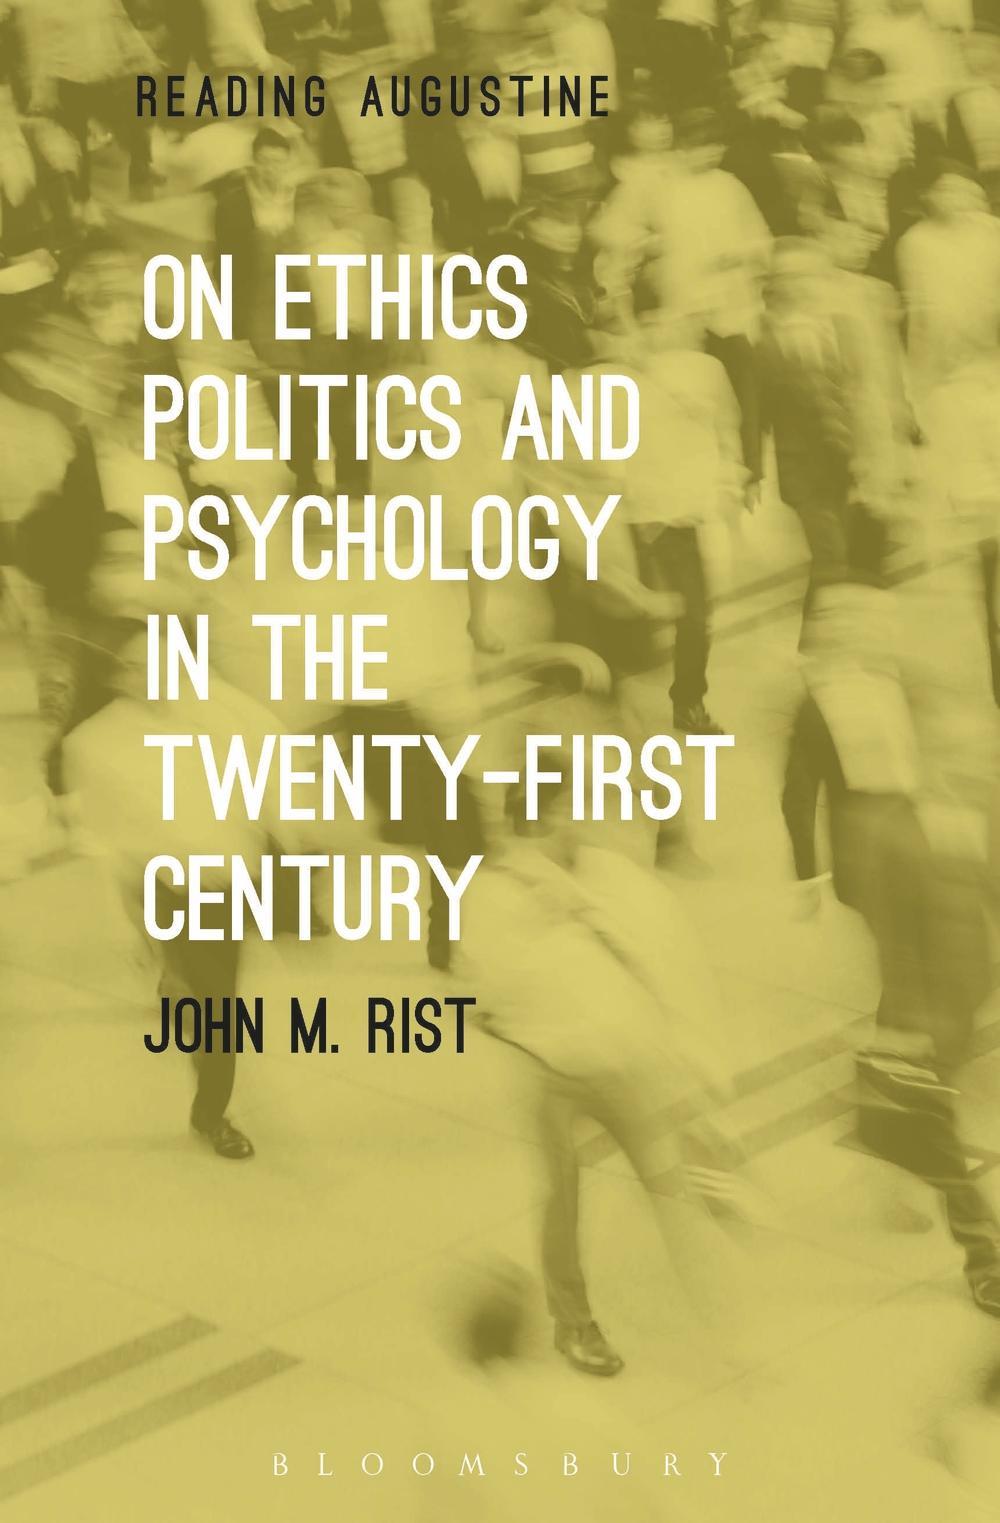 On Ethics, Politics and Psychology in the Twenty-First Centu